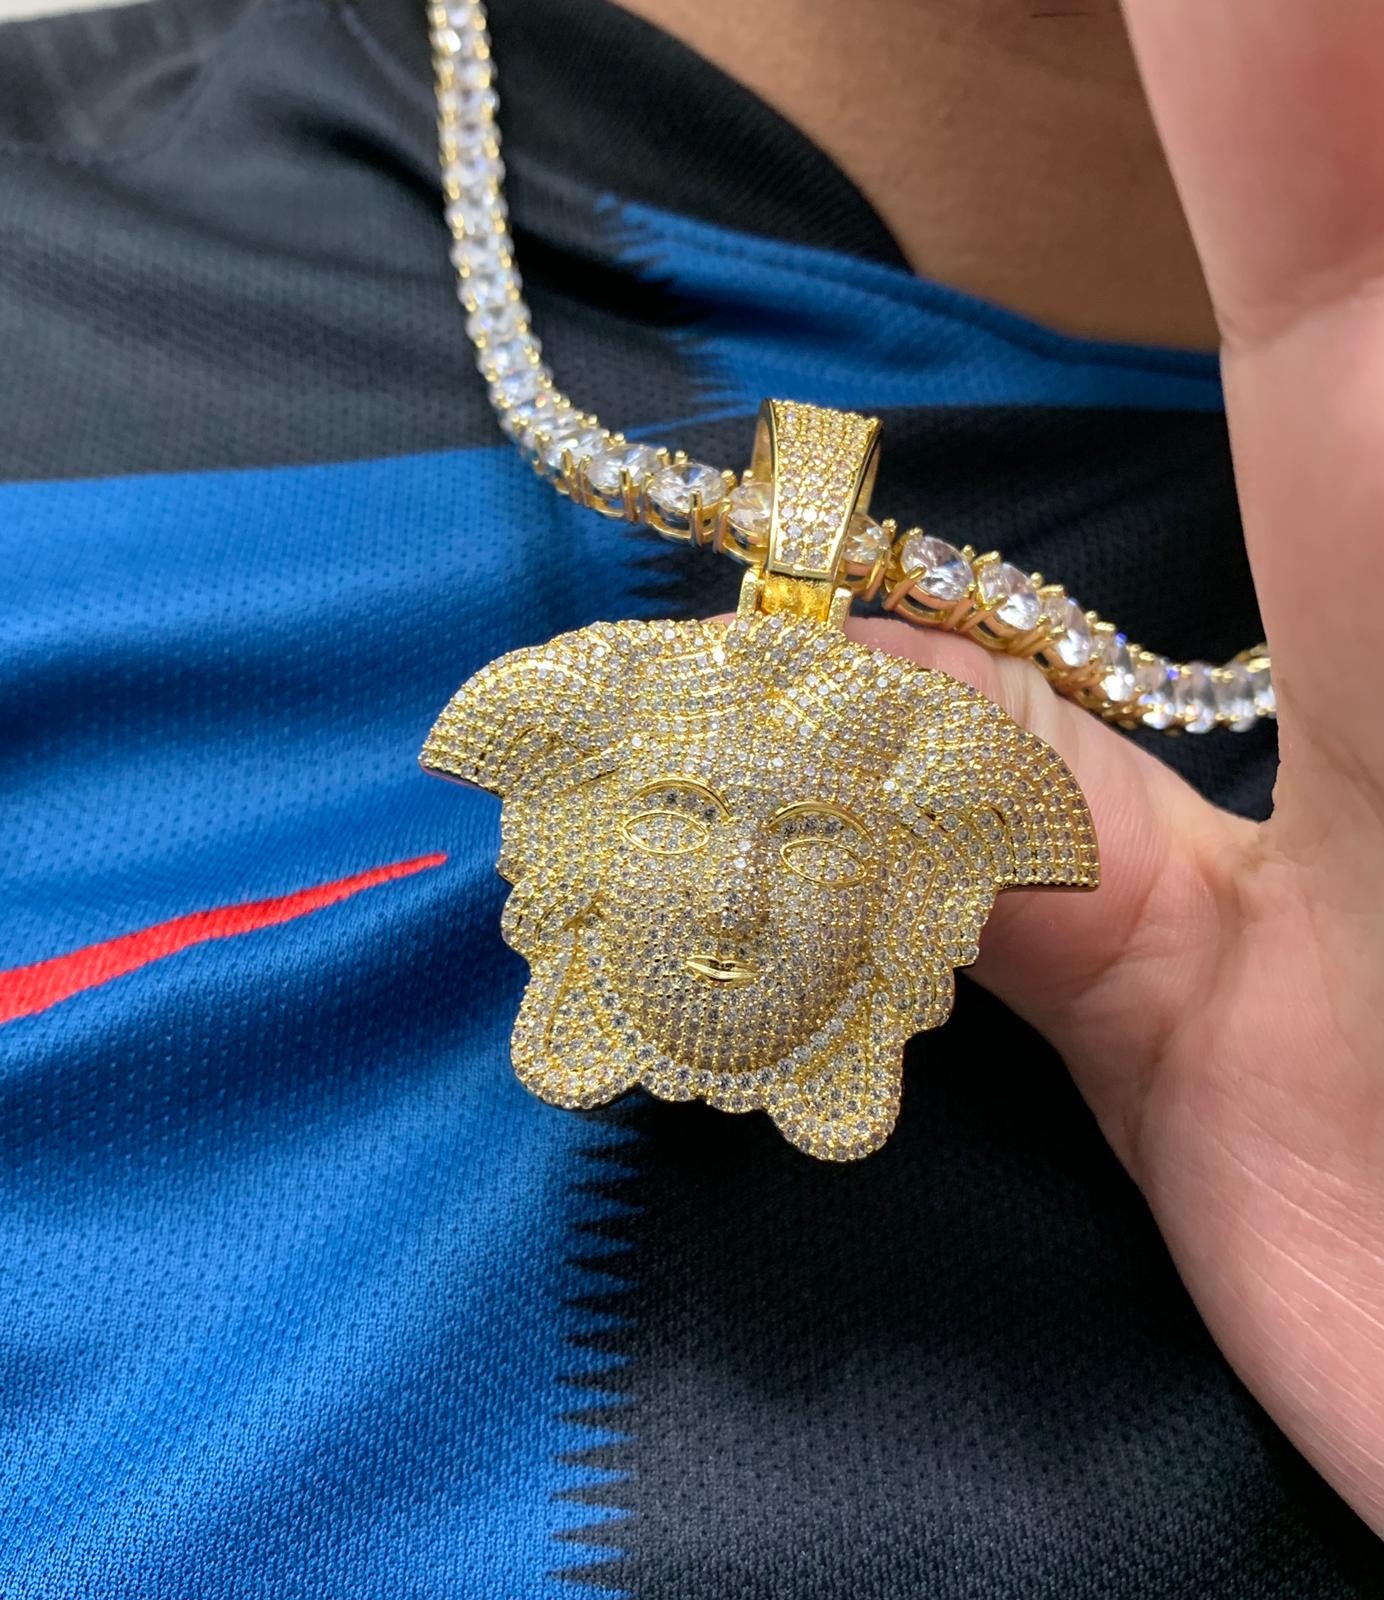 Versace pendant with tennis chain